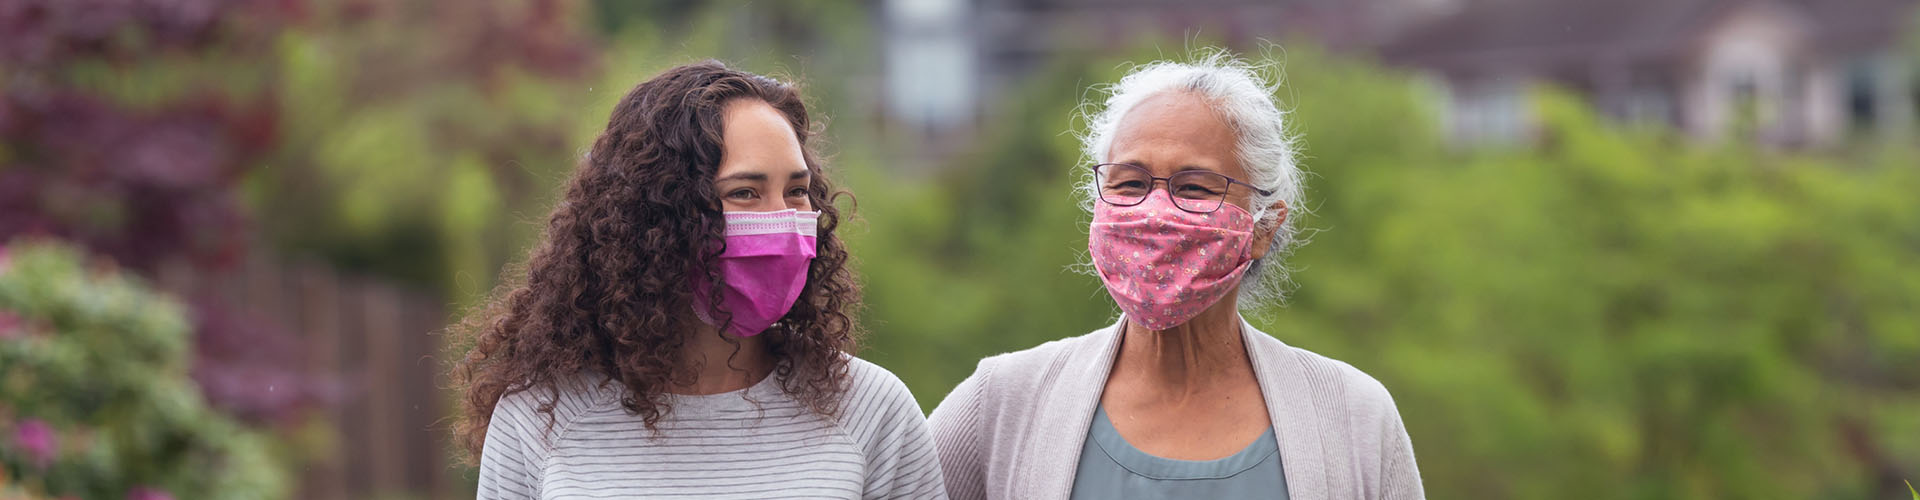 Senior woman and her adult daughter enjoying the outdoors together with masks on